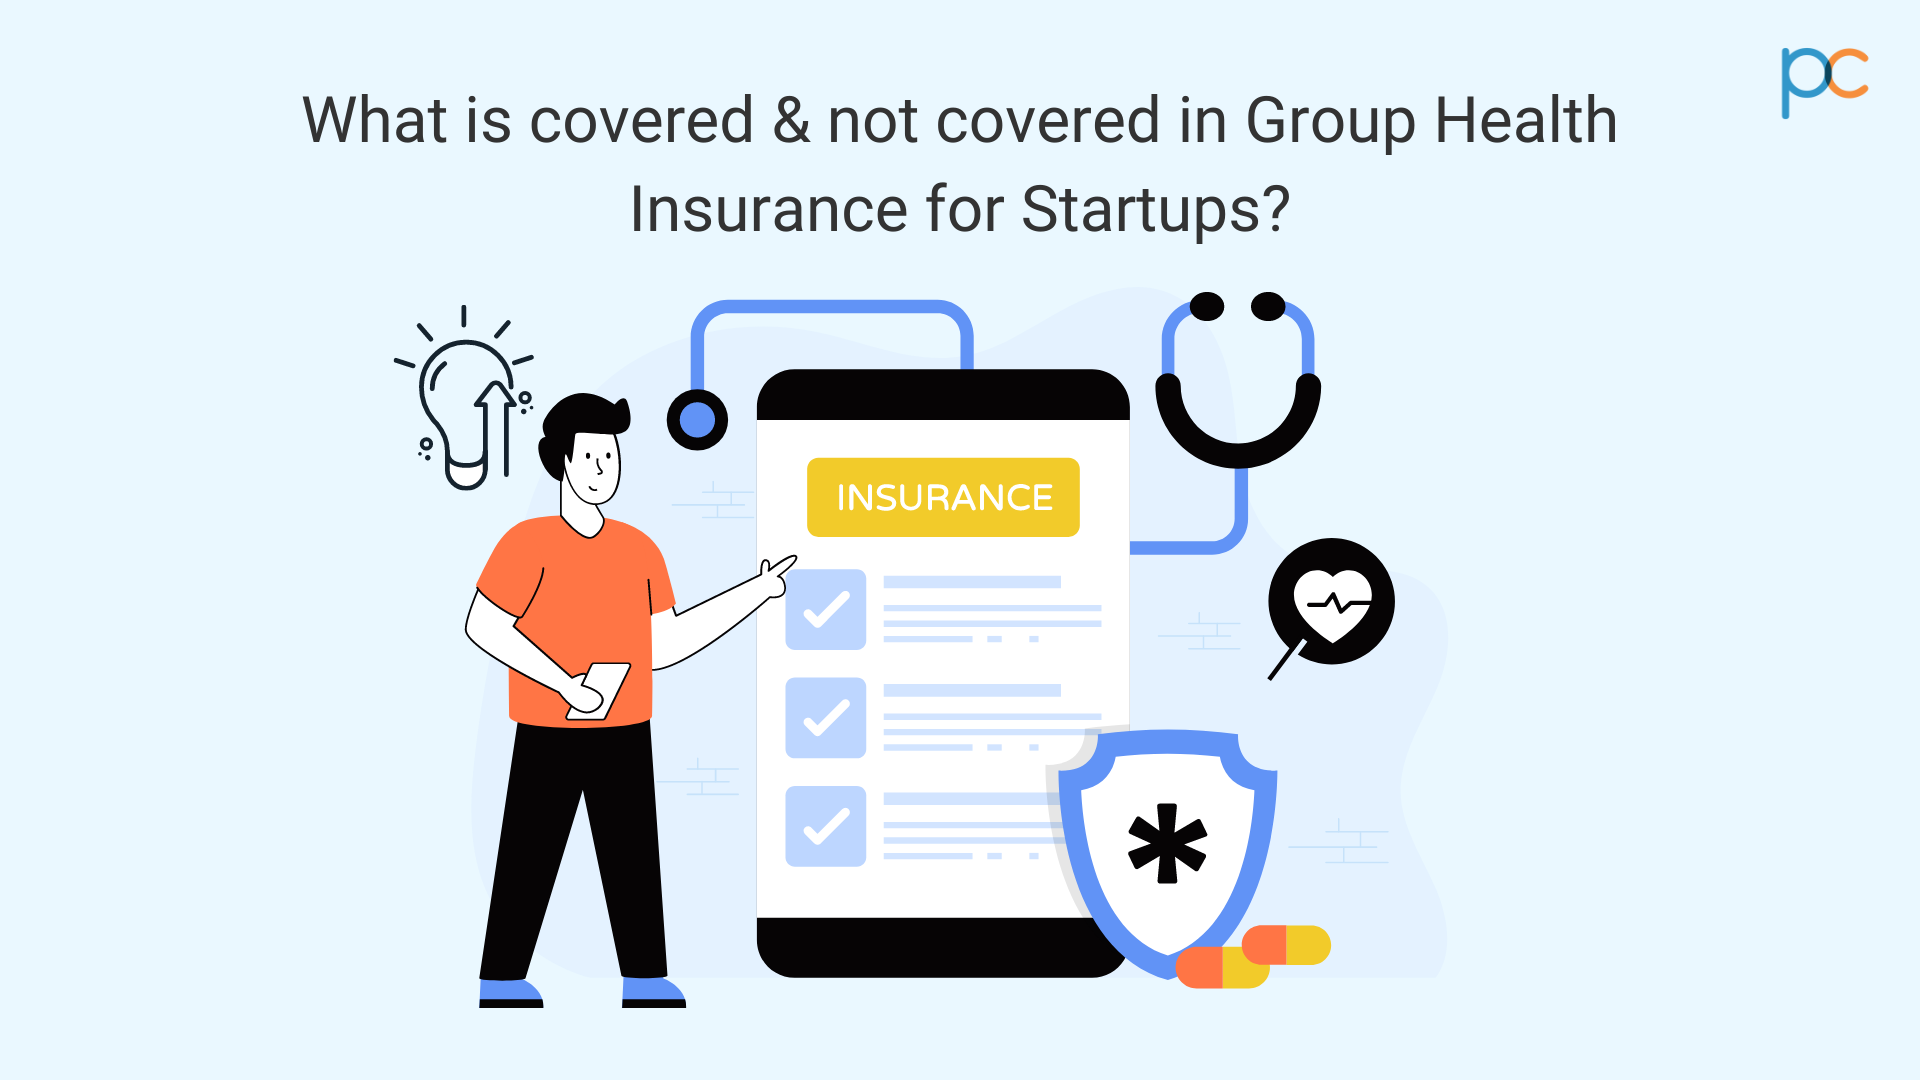 What is Covered not covered in Group Health Insurance for Startups 1